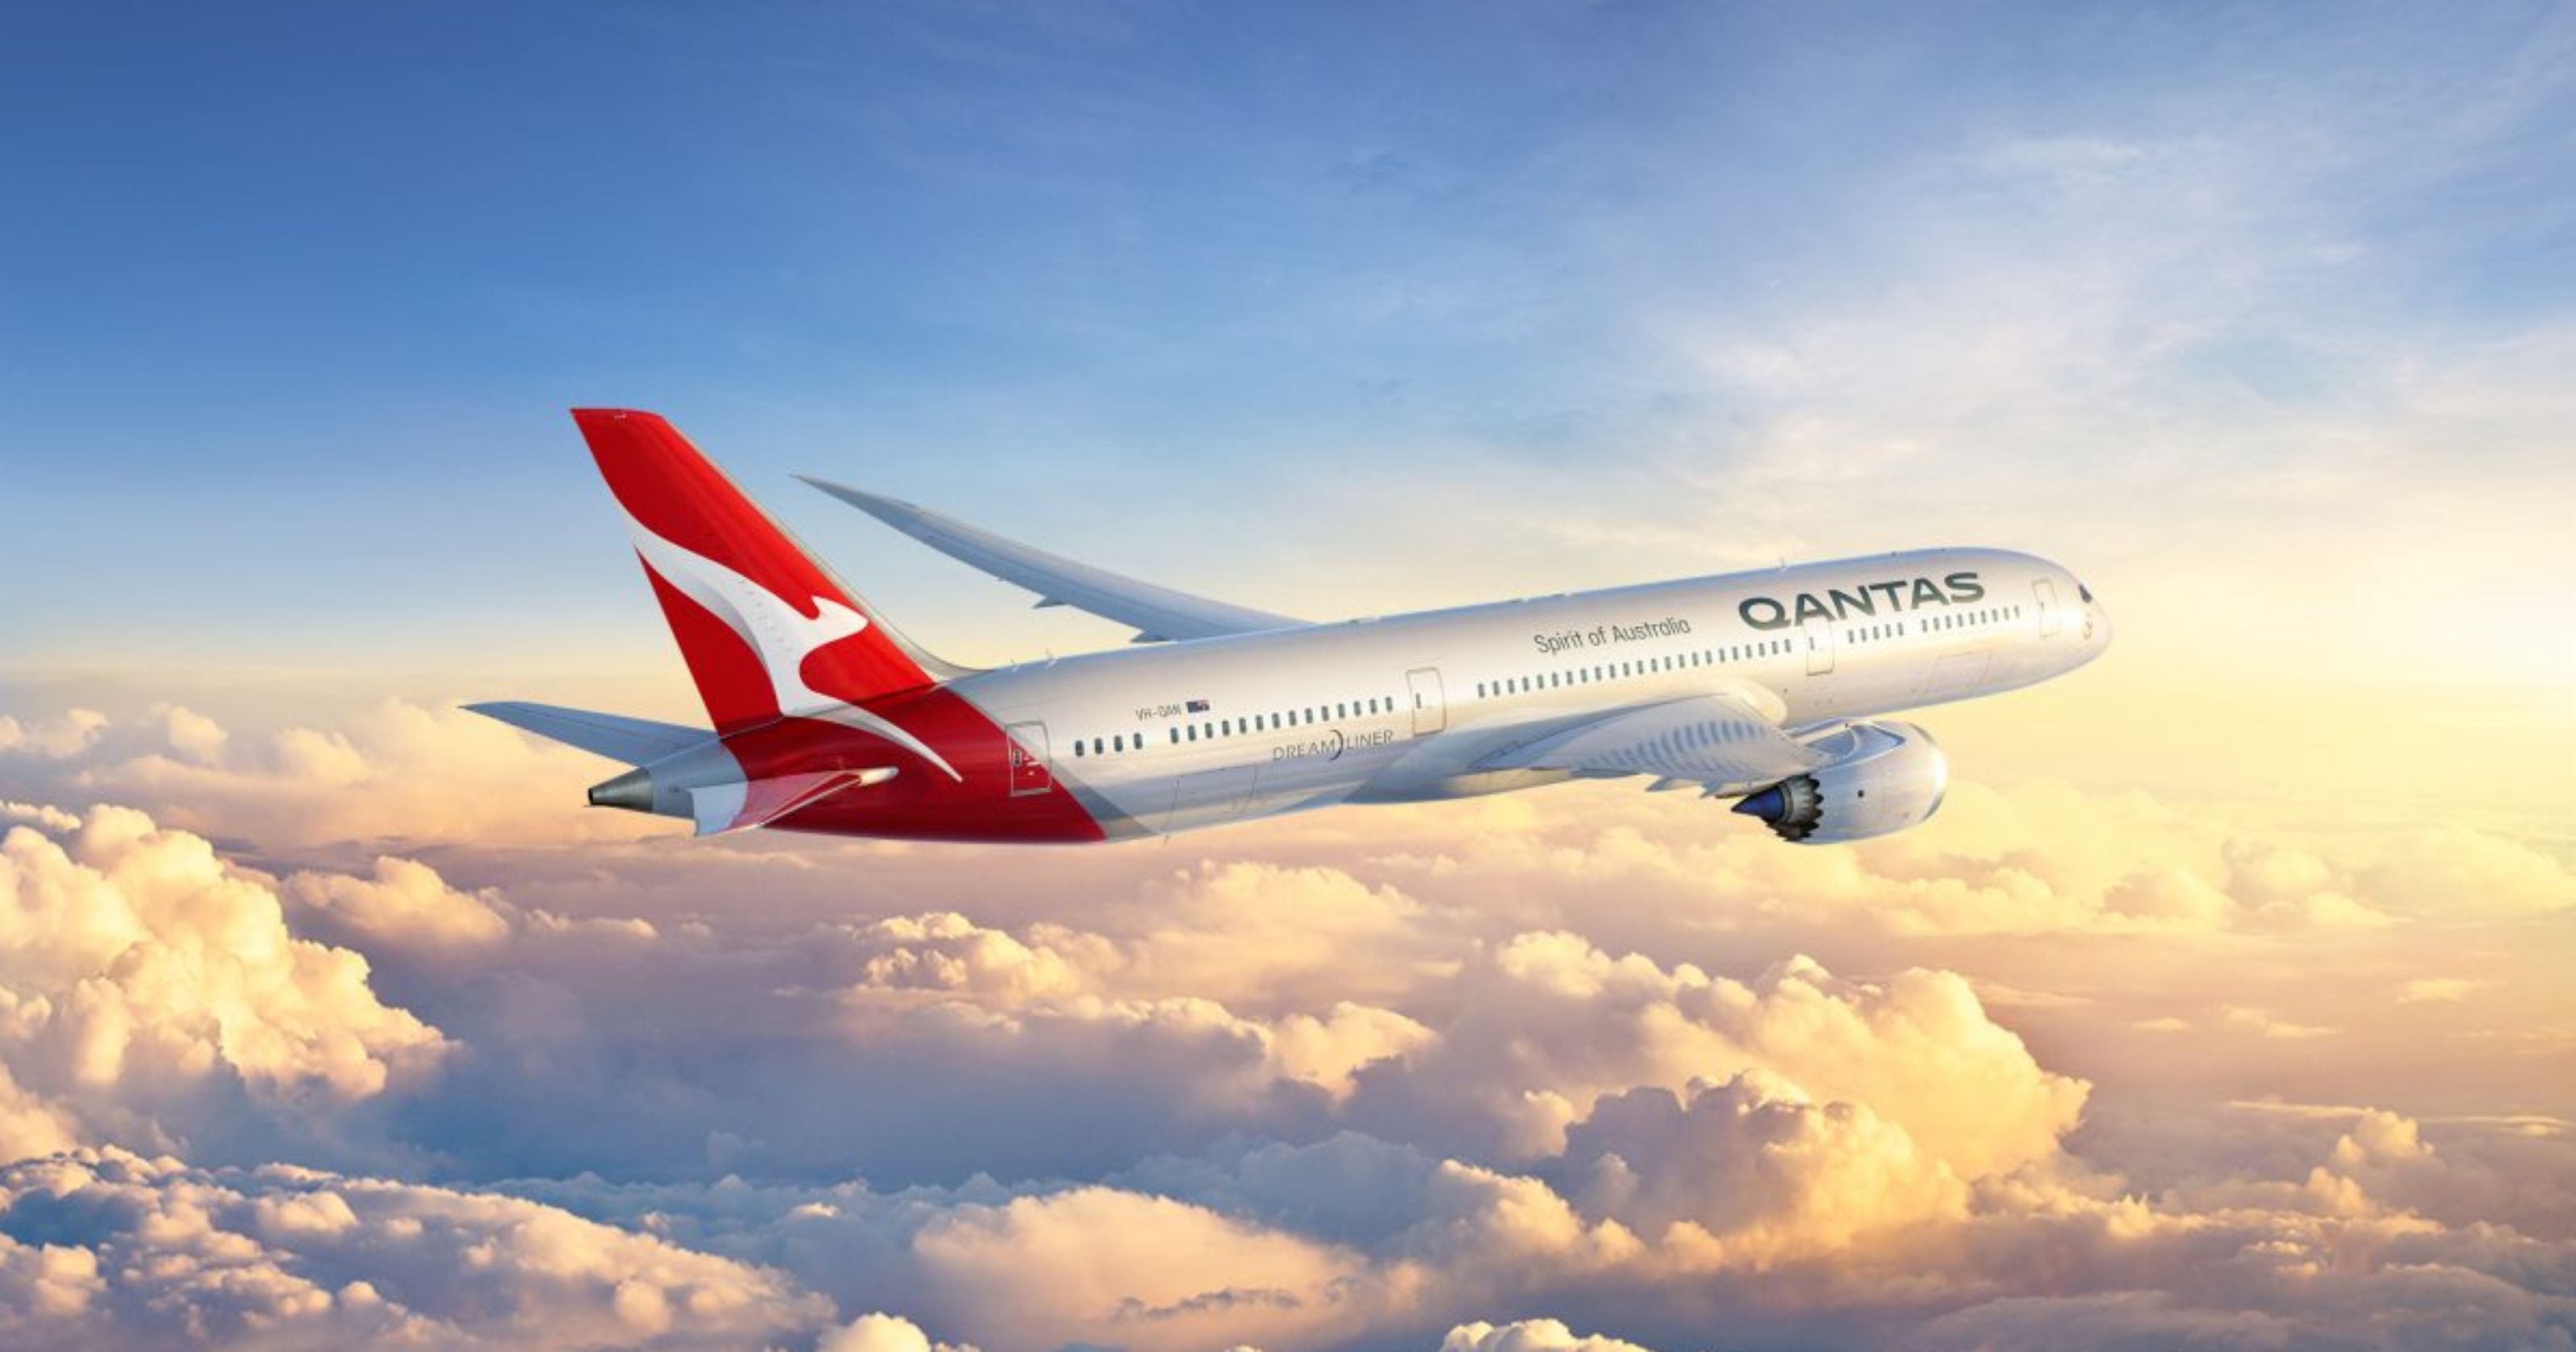 Qantas planning for a 20-hour non-stop flight to London